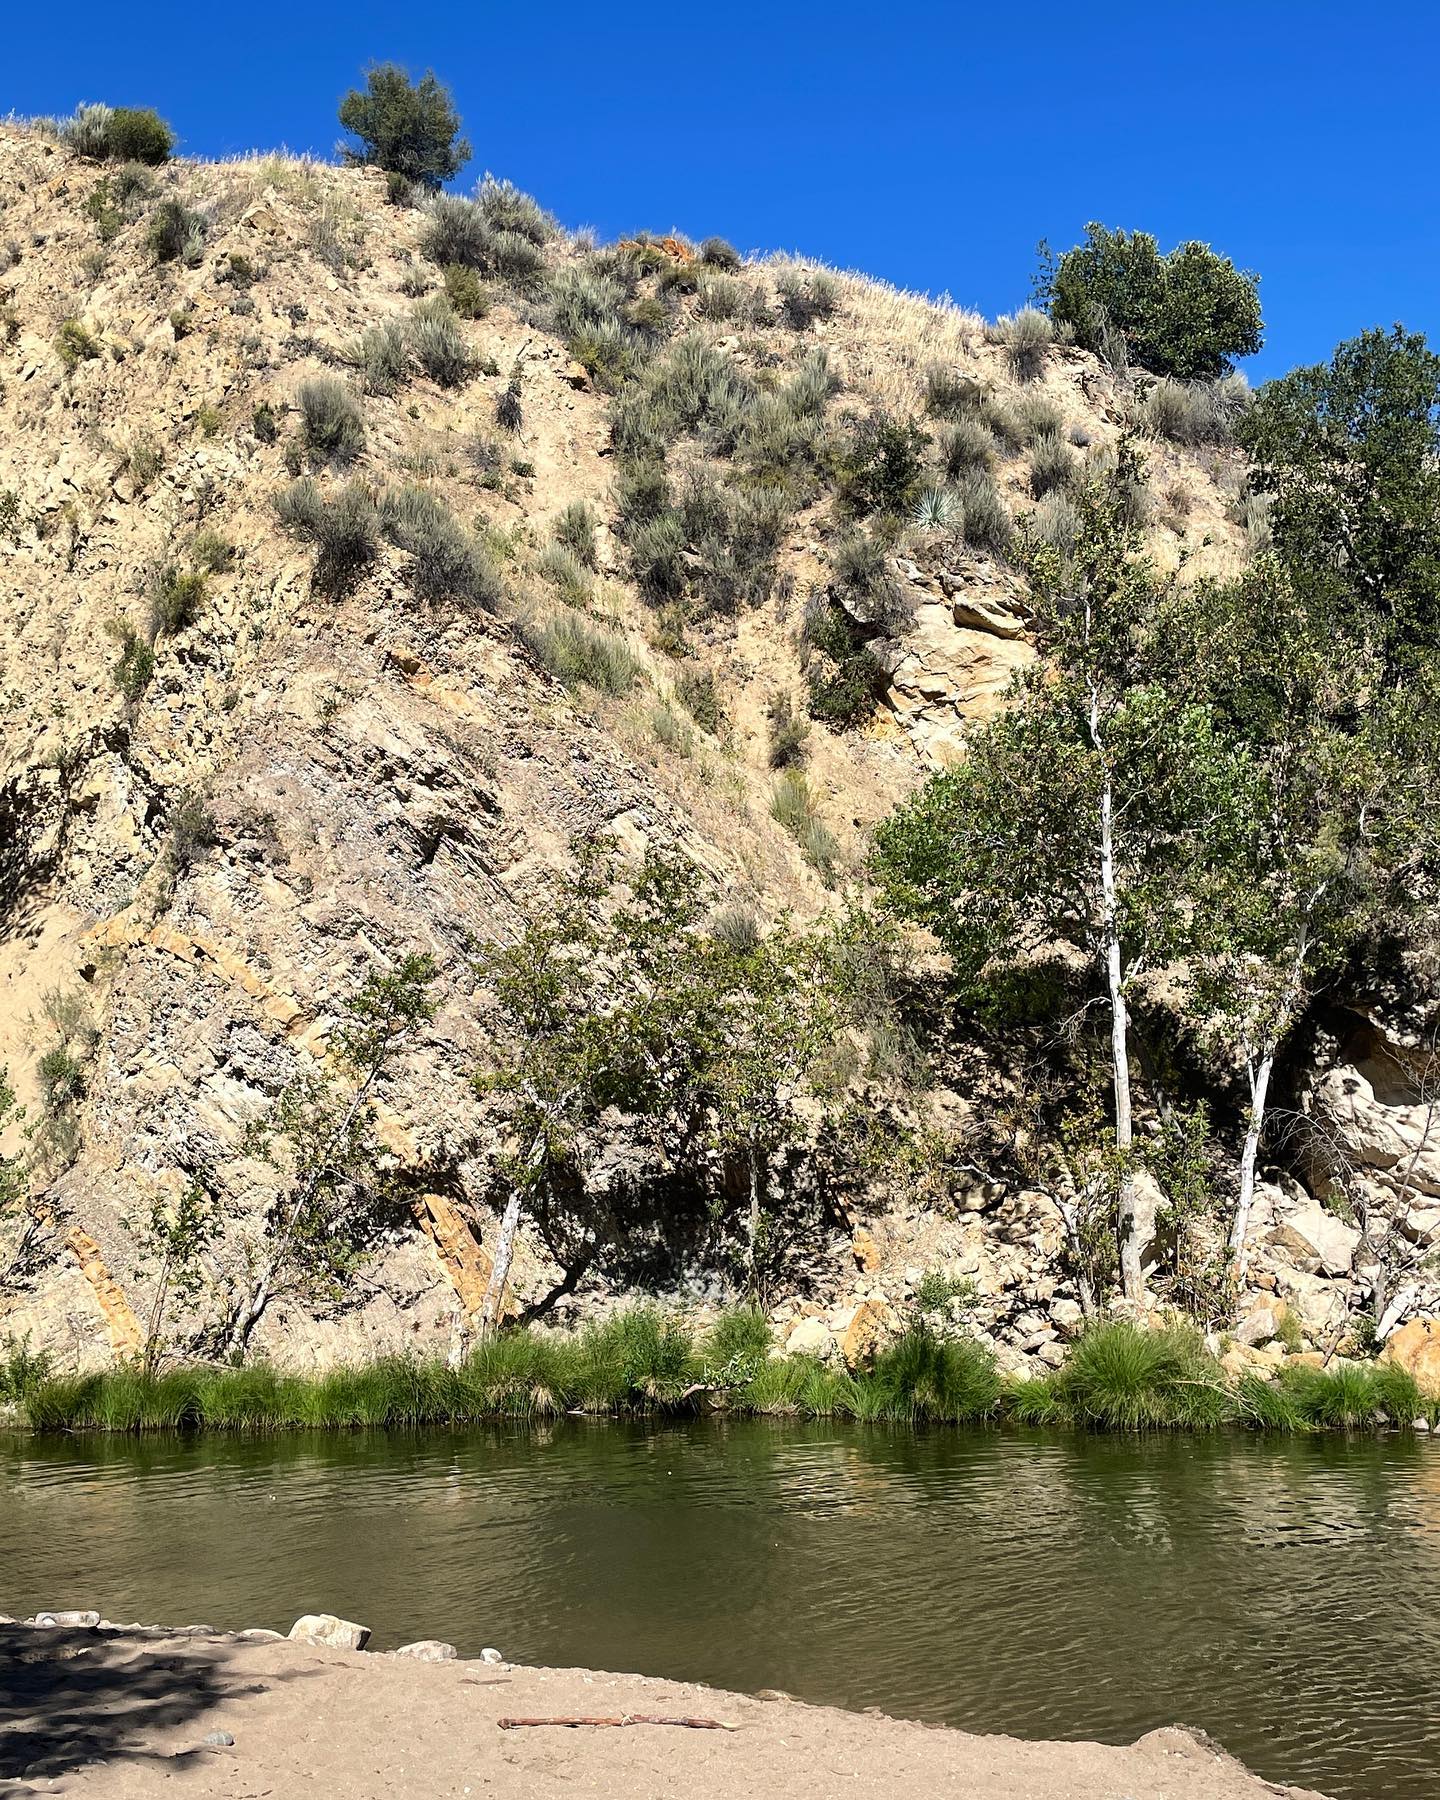 Camped, hiked, and swam at Arroyo Seco, Los Padres National Forest last week. Beautiful river, dramatic granite cliffs, chaparral trees and bushes, and 85 degrees. Amazing place.